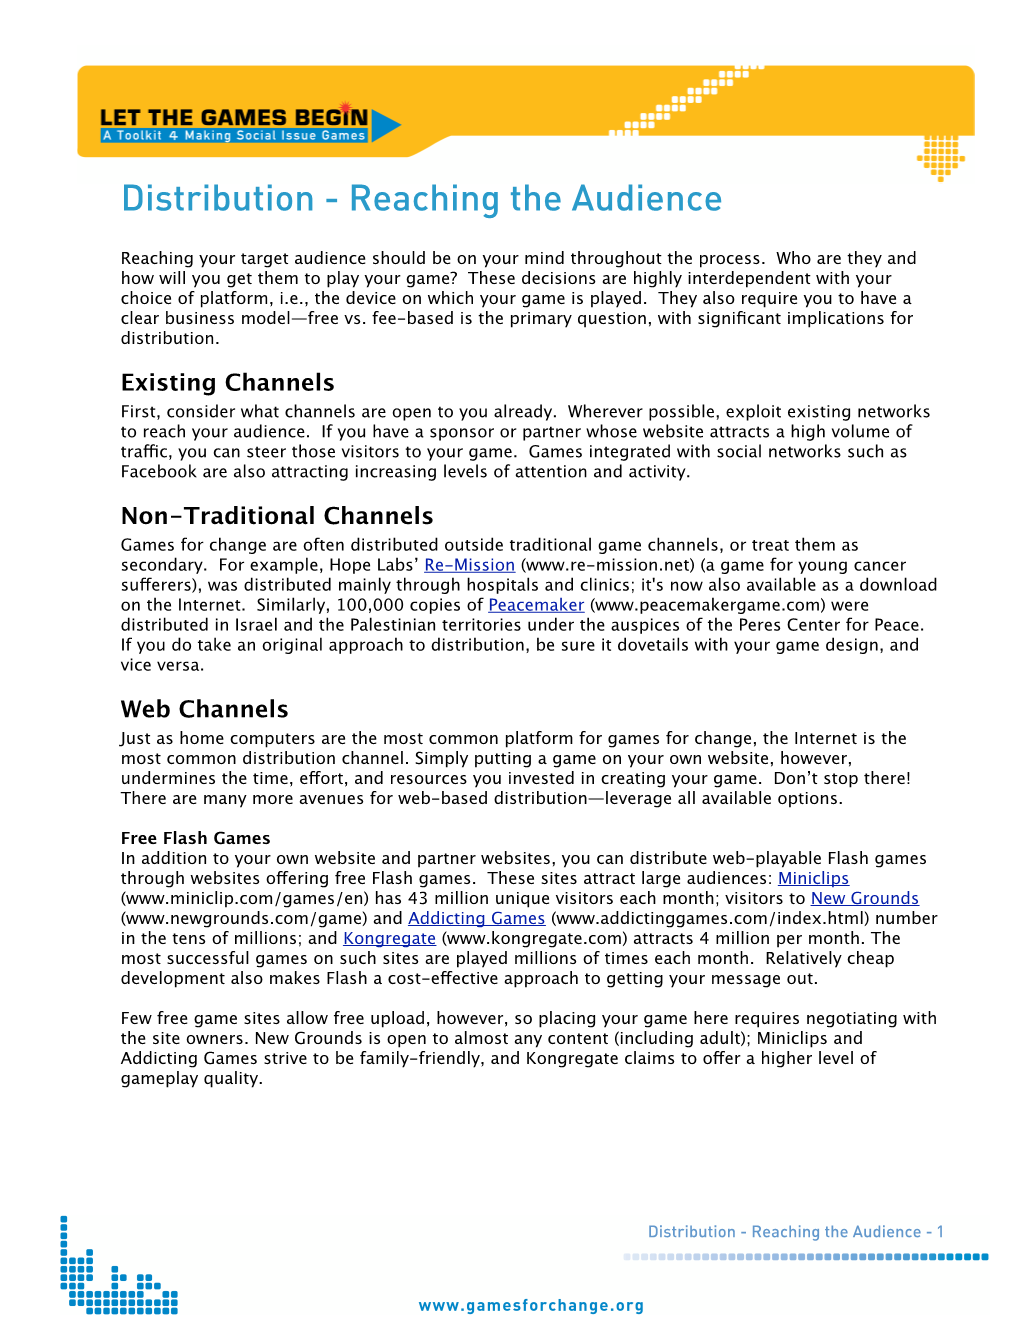 Distribution - Reaching the Audience